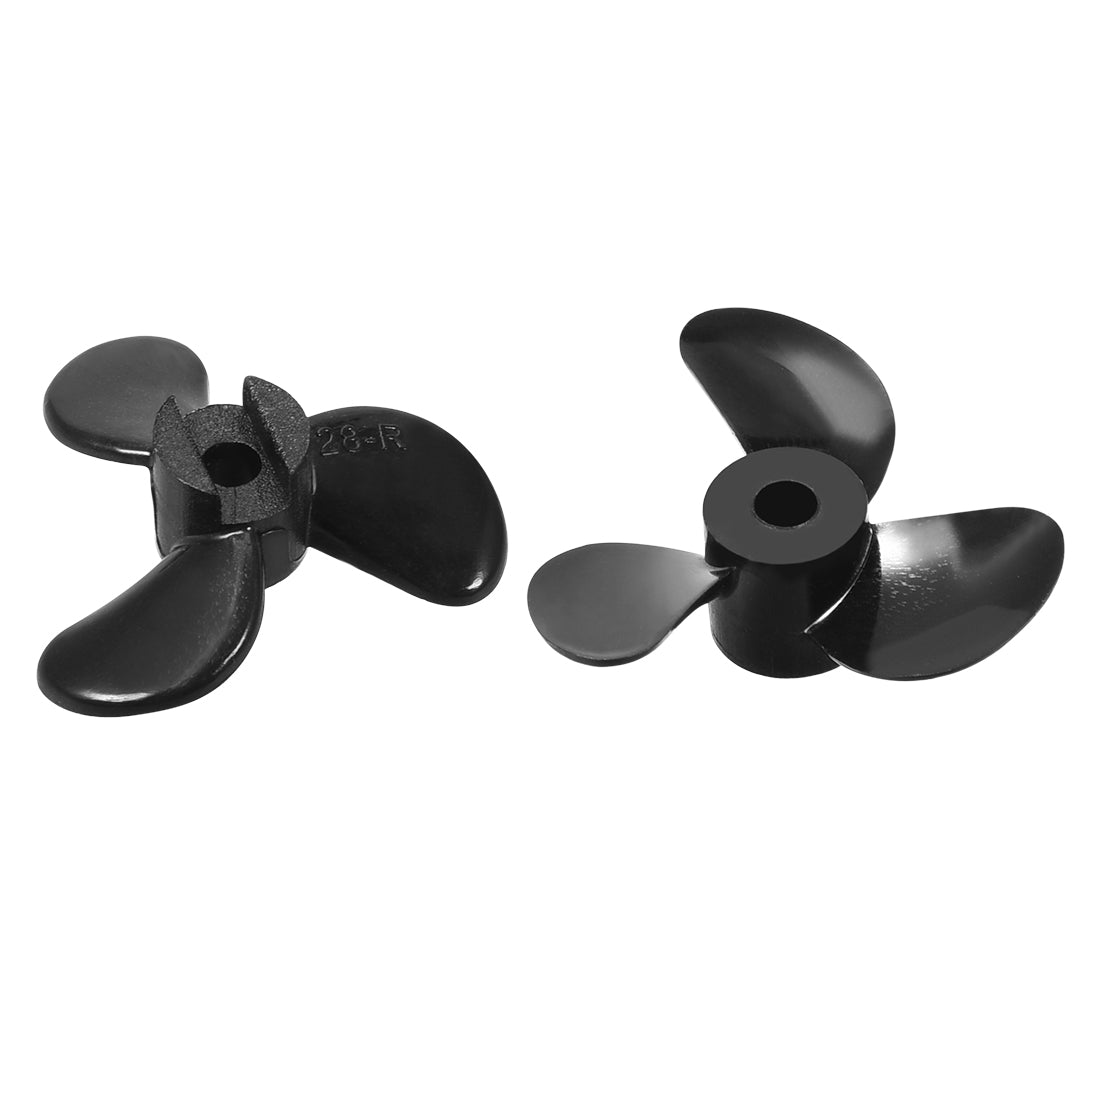 uxcell Uxcell RC Boat CCW Propeller 3mm Shaft 3 Vanes 28mm 1.4 P Fan Shape Pastic Black Rotating Propeller Props for RC Boat 2pcs